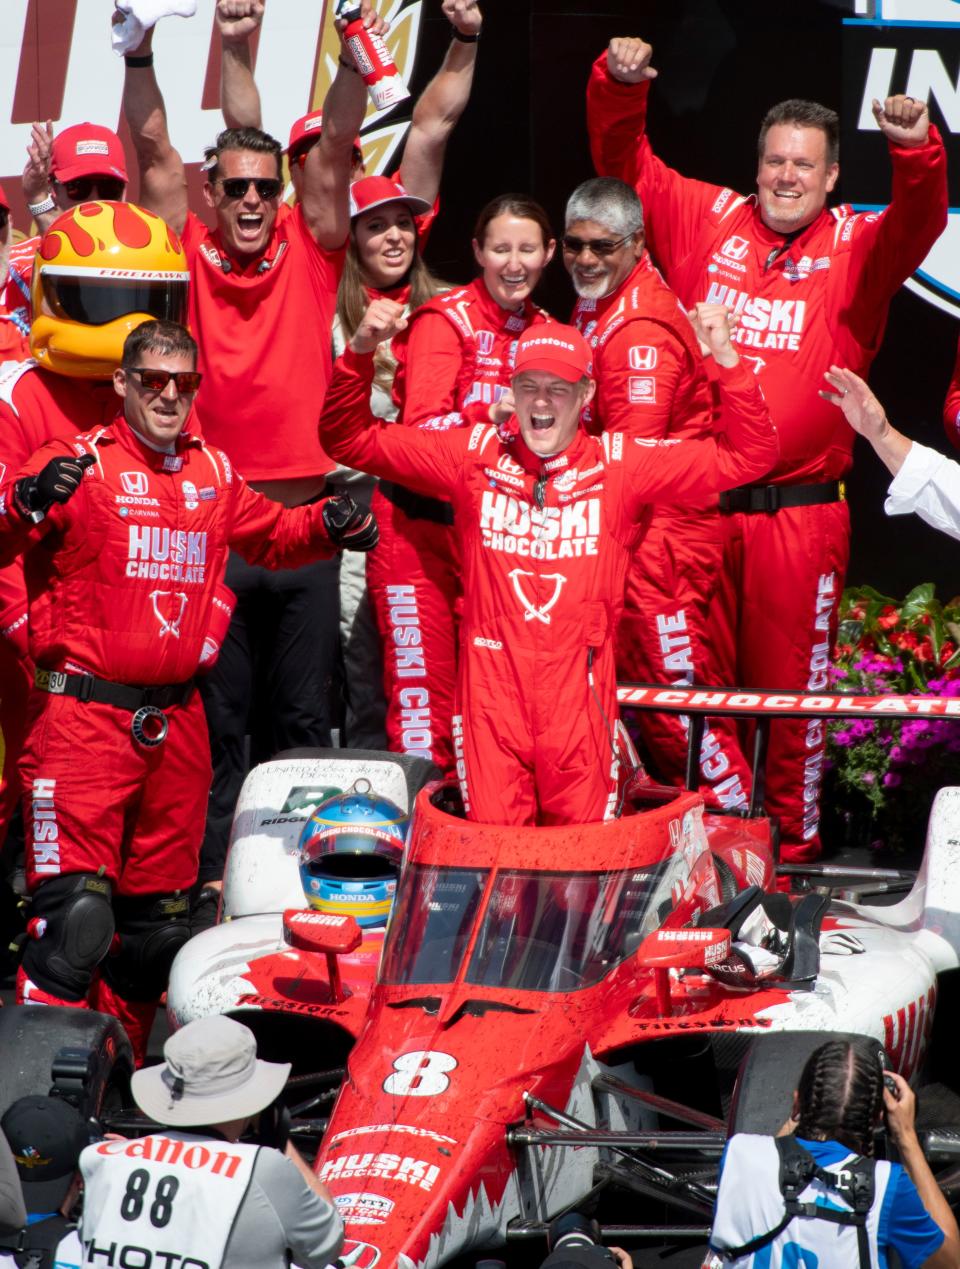 Chip Ganassi Racing driver Marcus Ericsson (8) celebrates on the podium Sunday, May 29, 2022, after winning the 106th running of the Indianapolis 500 at Indianapolis Motor Speedway